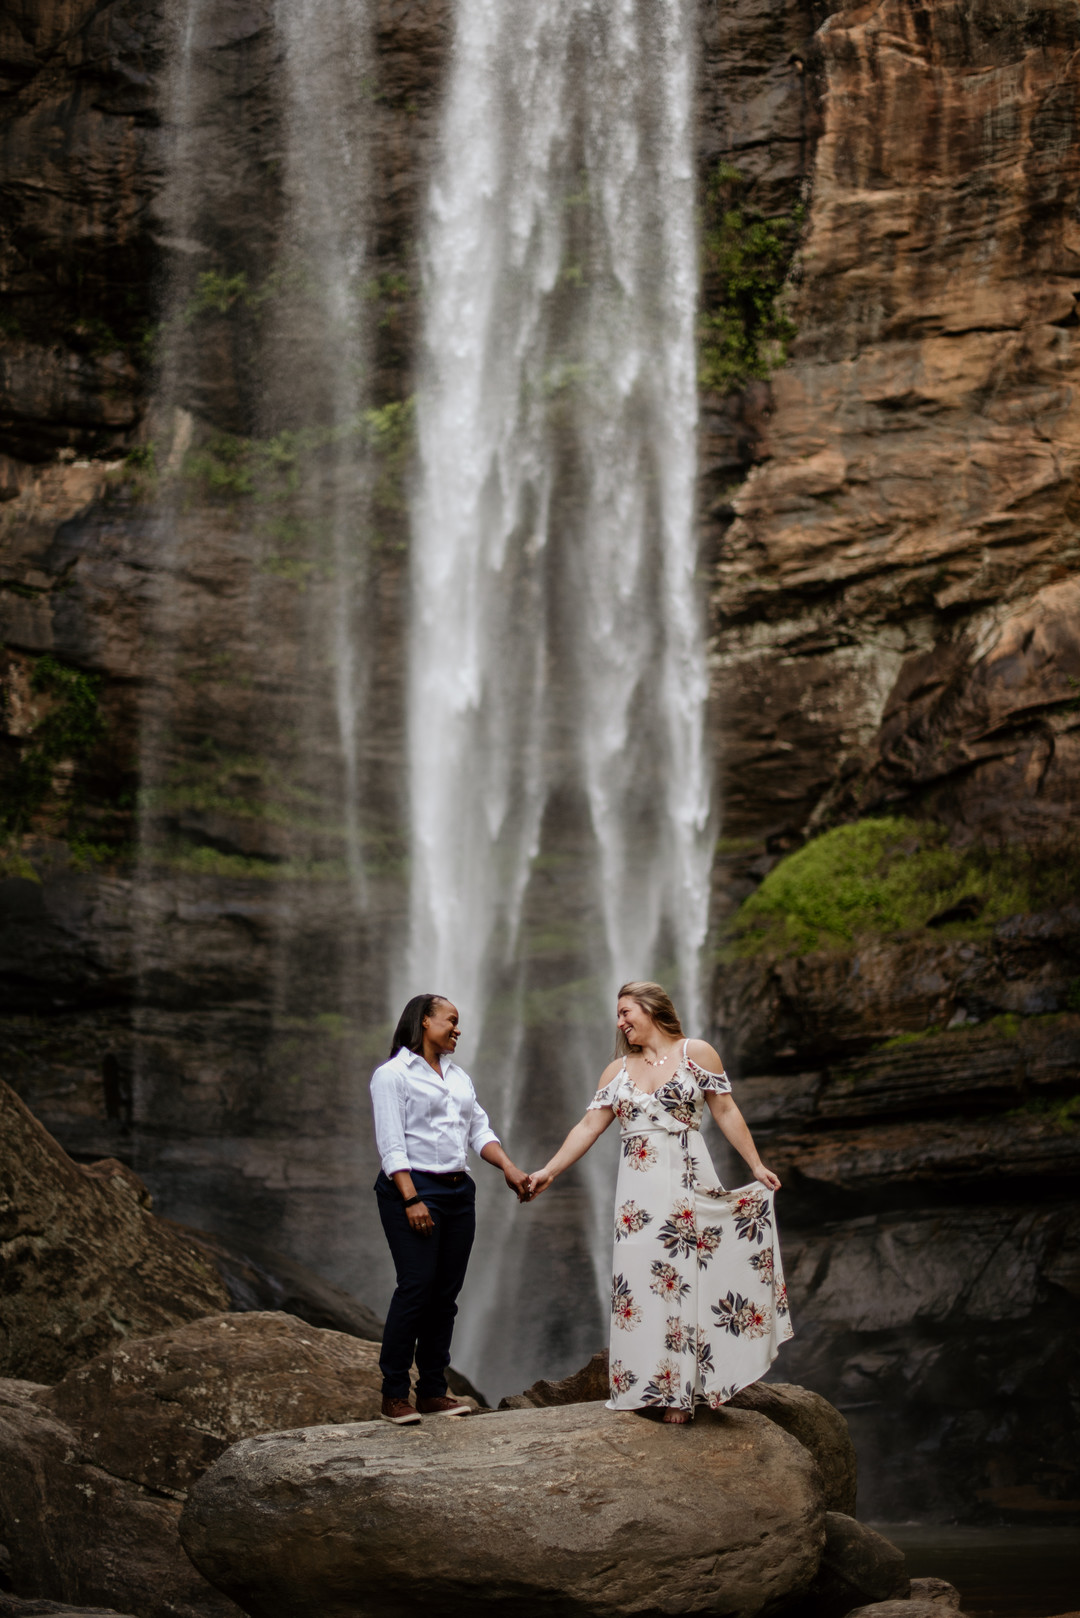 Waterfall adventure engagement photos at Toccoa Falls two brides fun holding hands